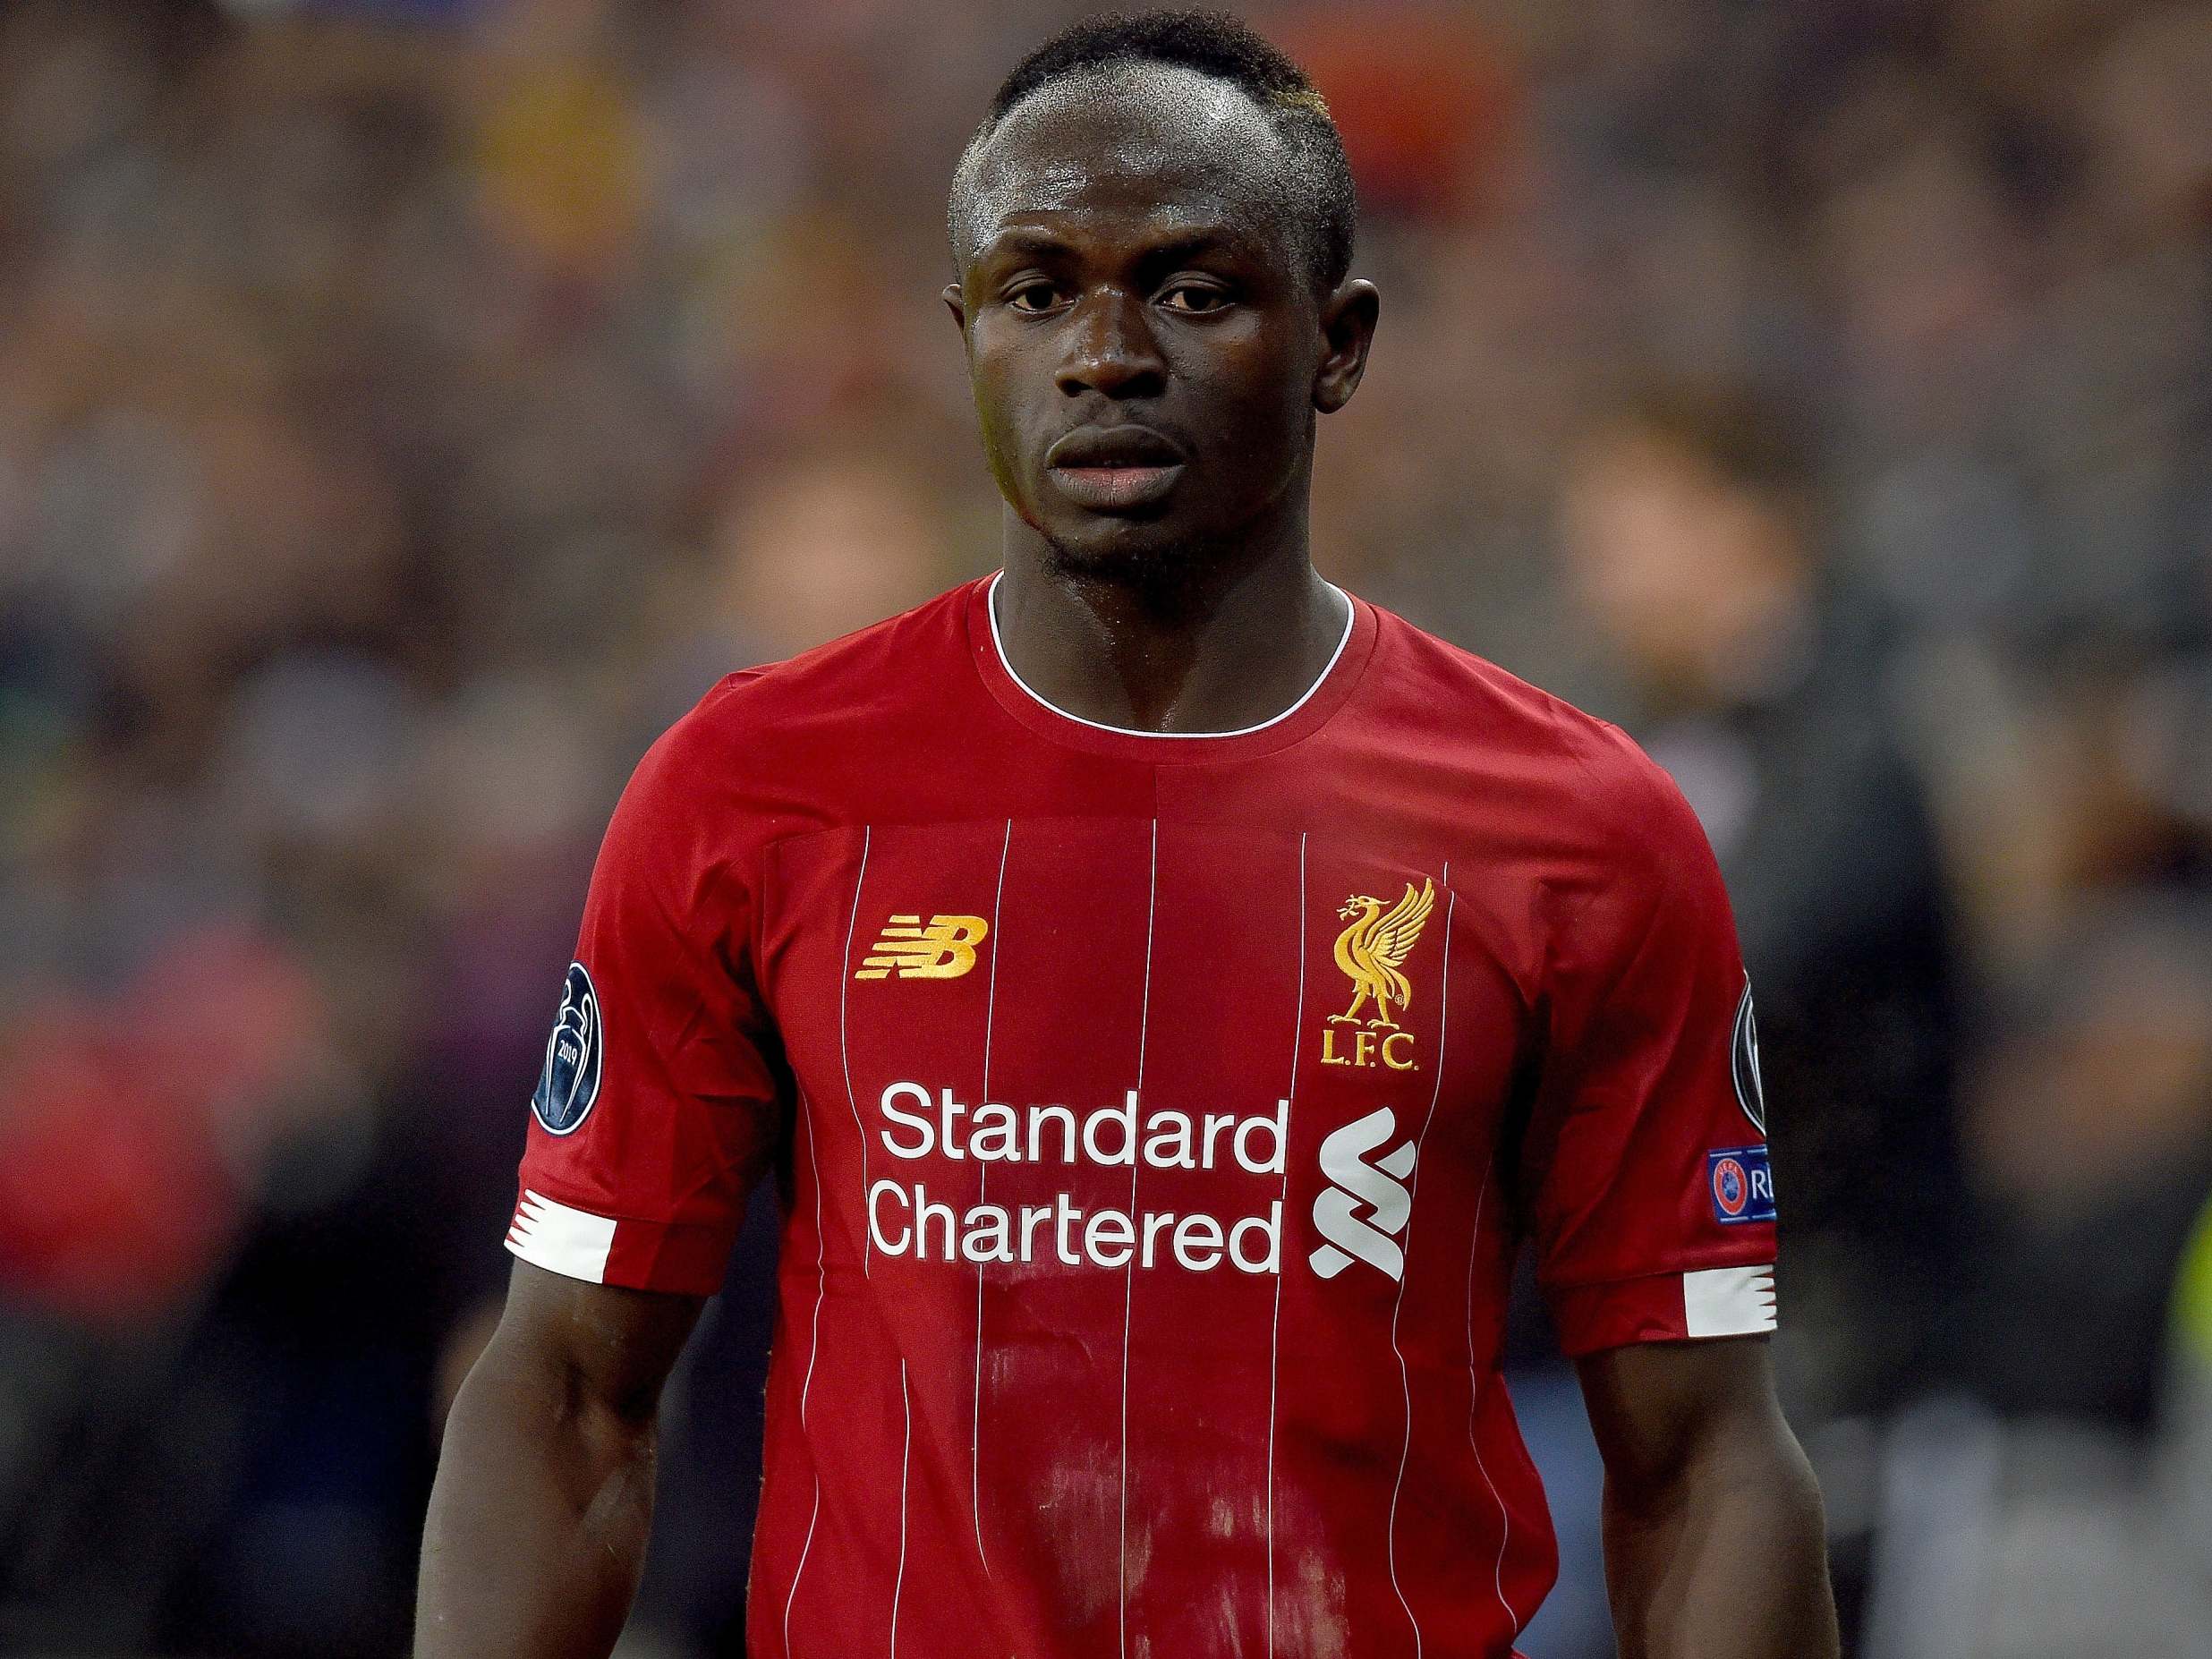 Both Liverpool and Salzburg have reason to be thankful and proud of Sadio Mane